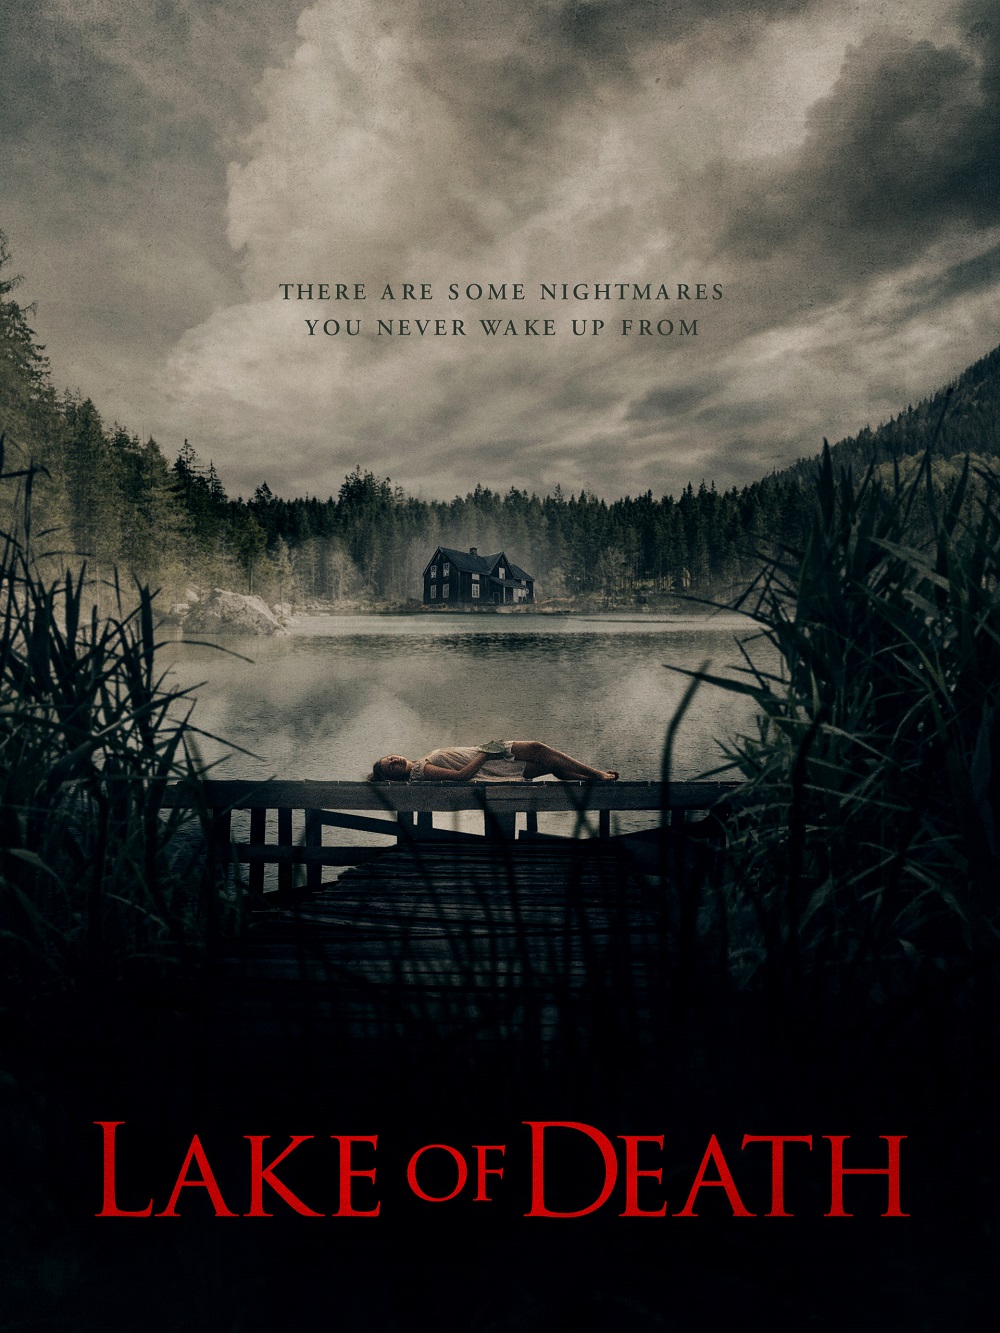 [News] Shudder Unveils LAKE OF DEATH Trailer Ahead of Premiere